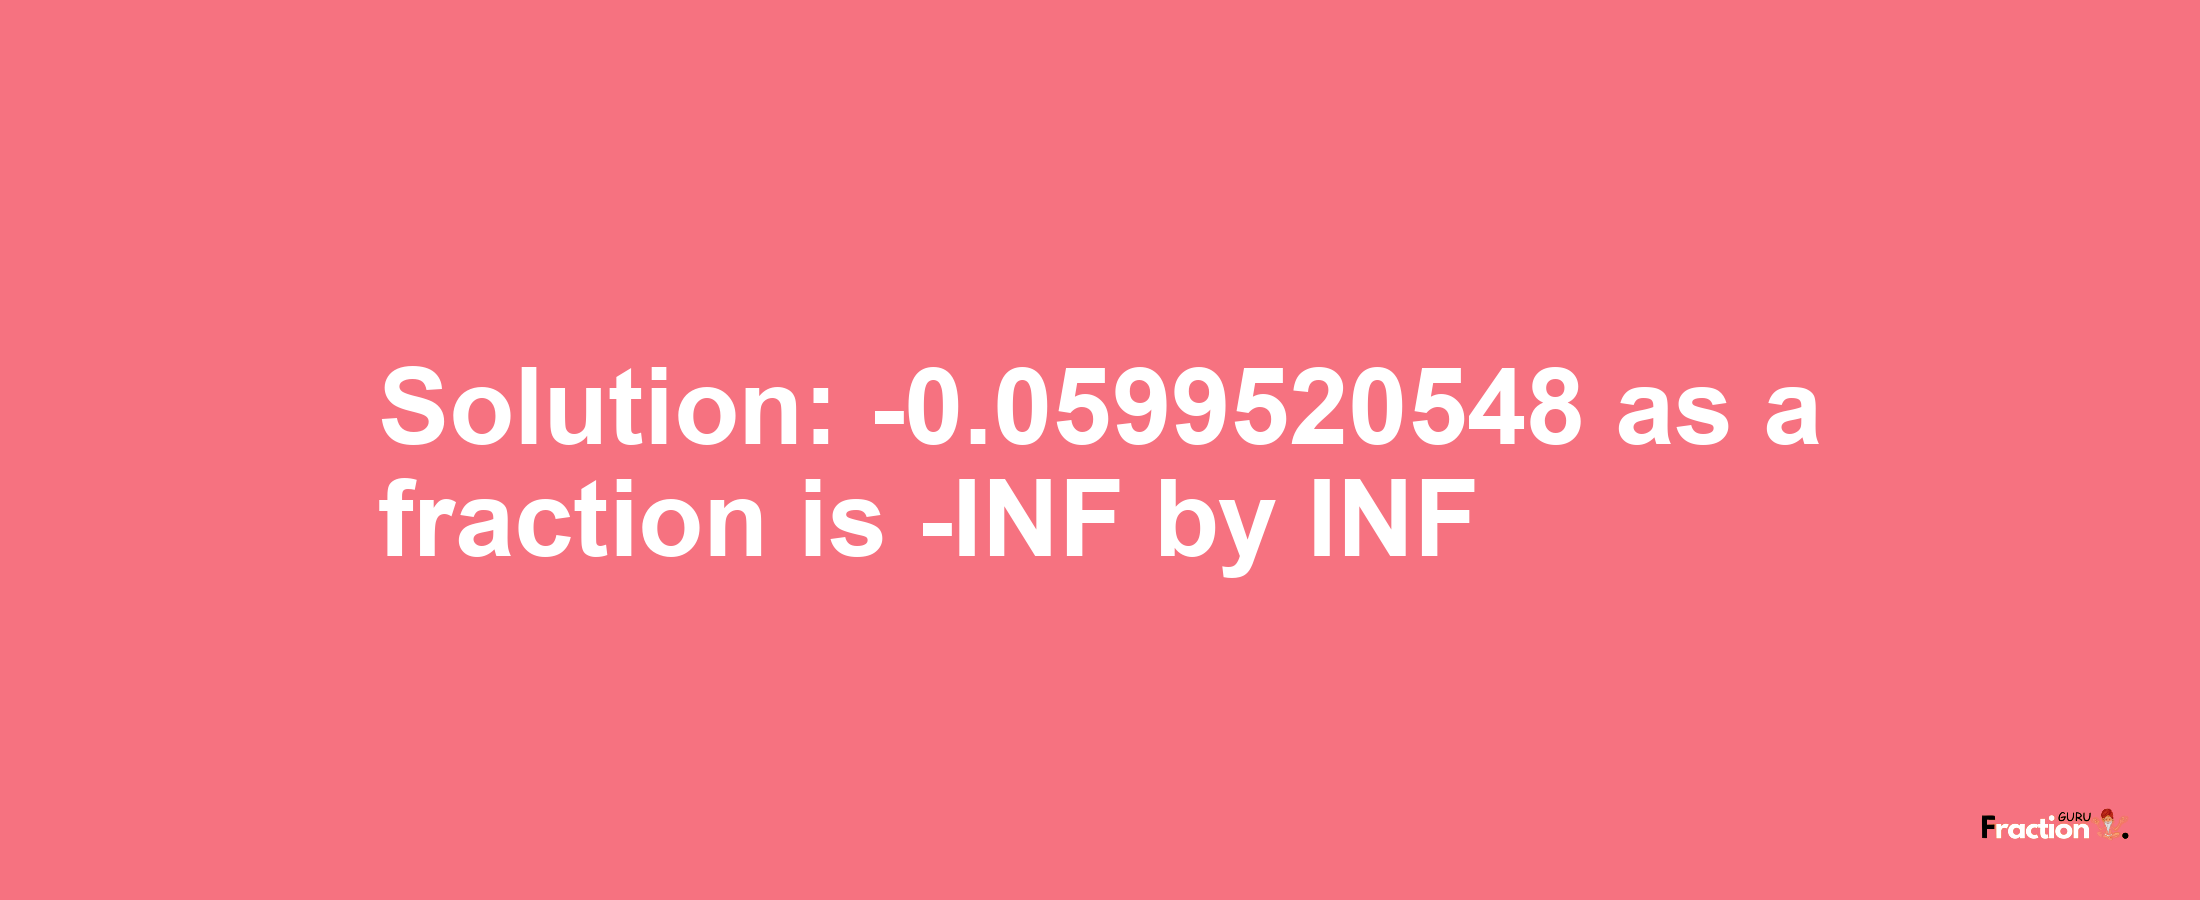 Solution:-0.0599520548 as a fraction is -INF/INF